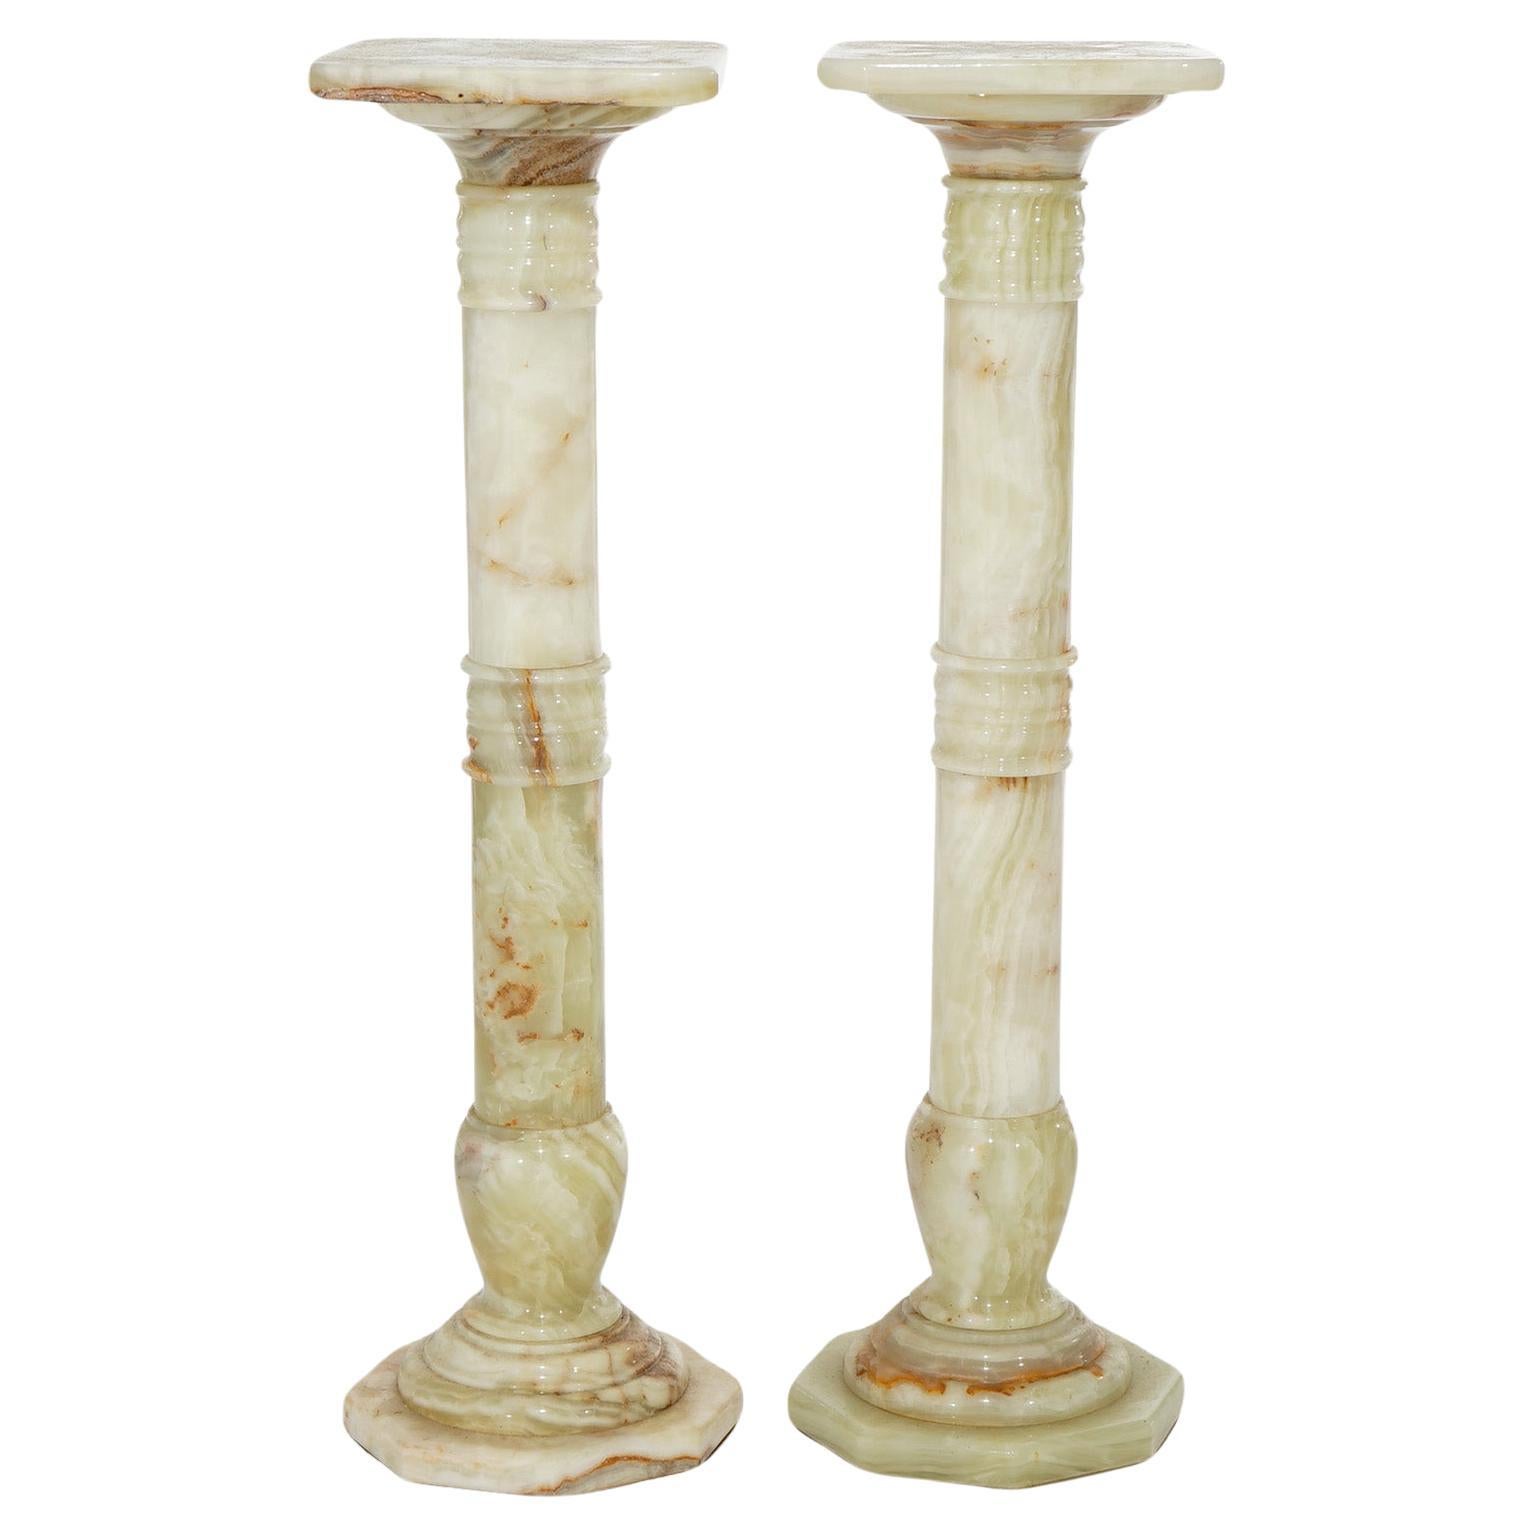 Antique Pair of Classical Carved Onyx Sculpture Display Pedestals Early 20th C For Sale